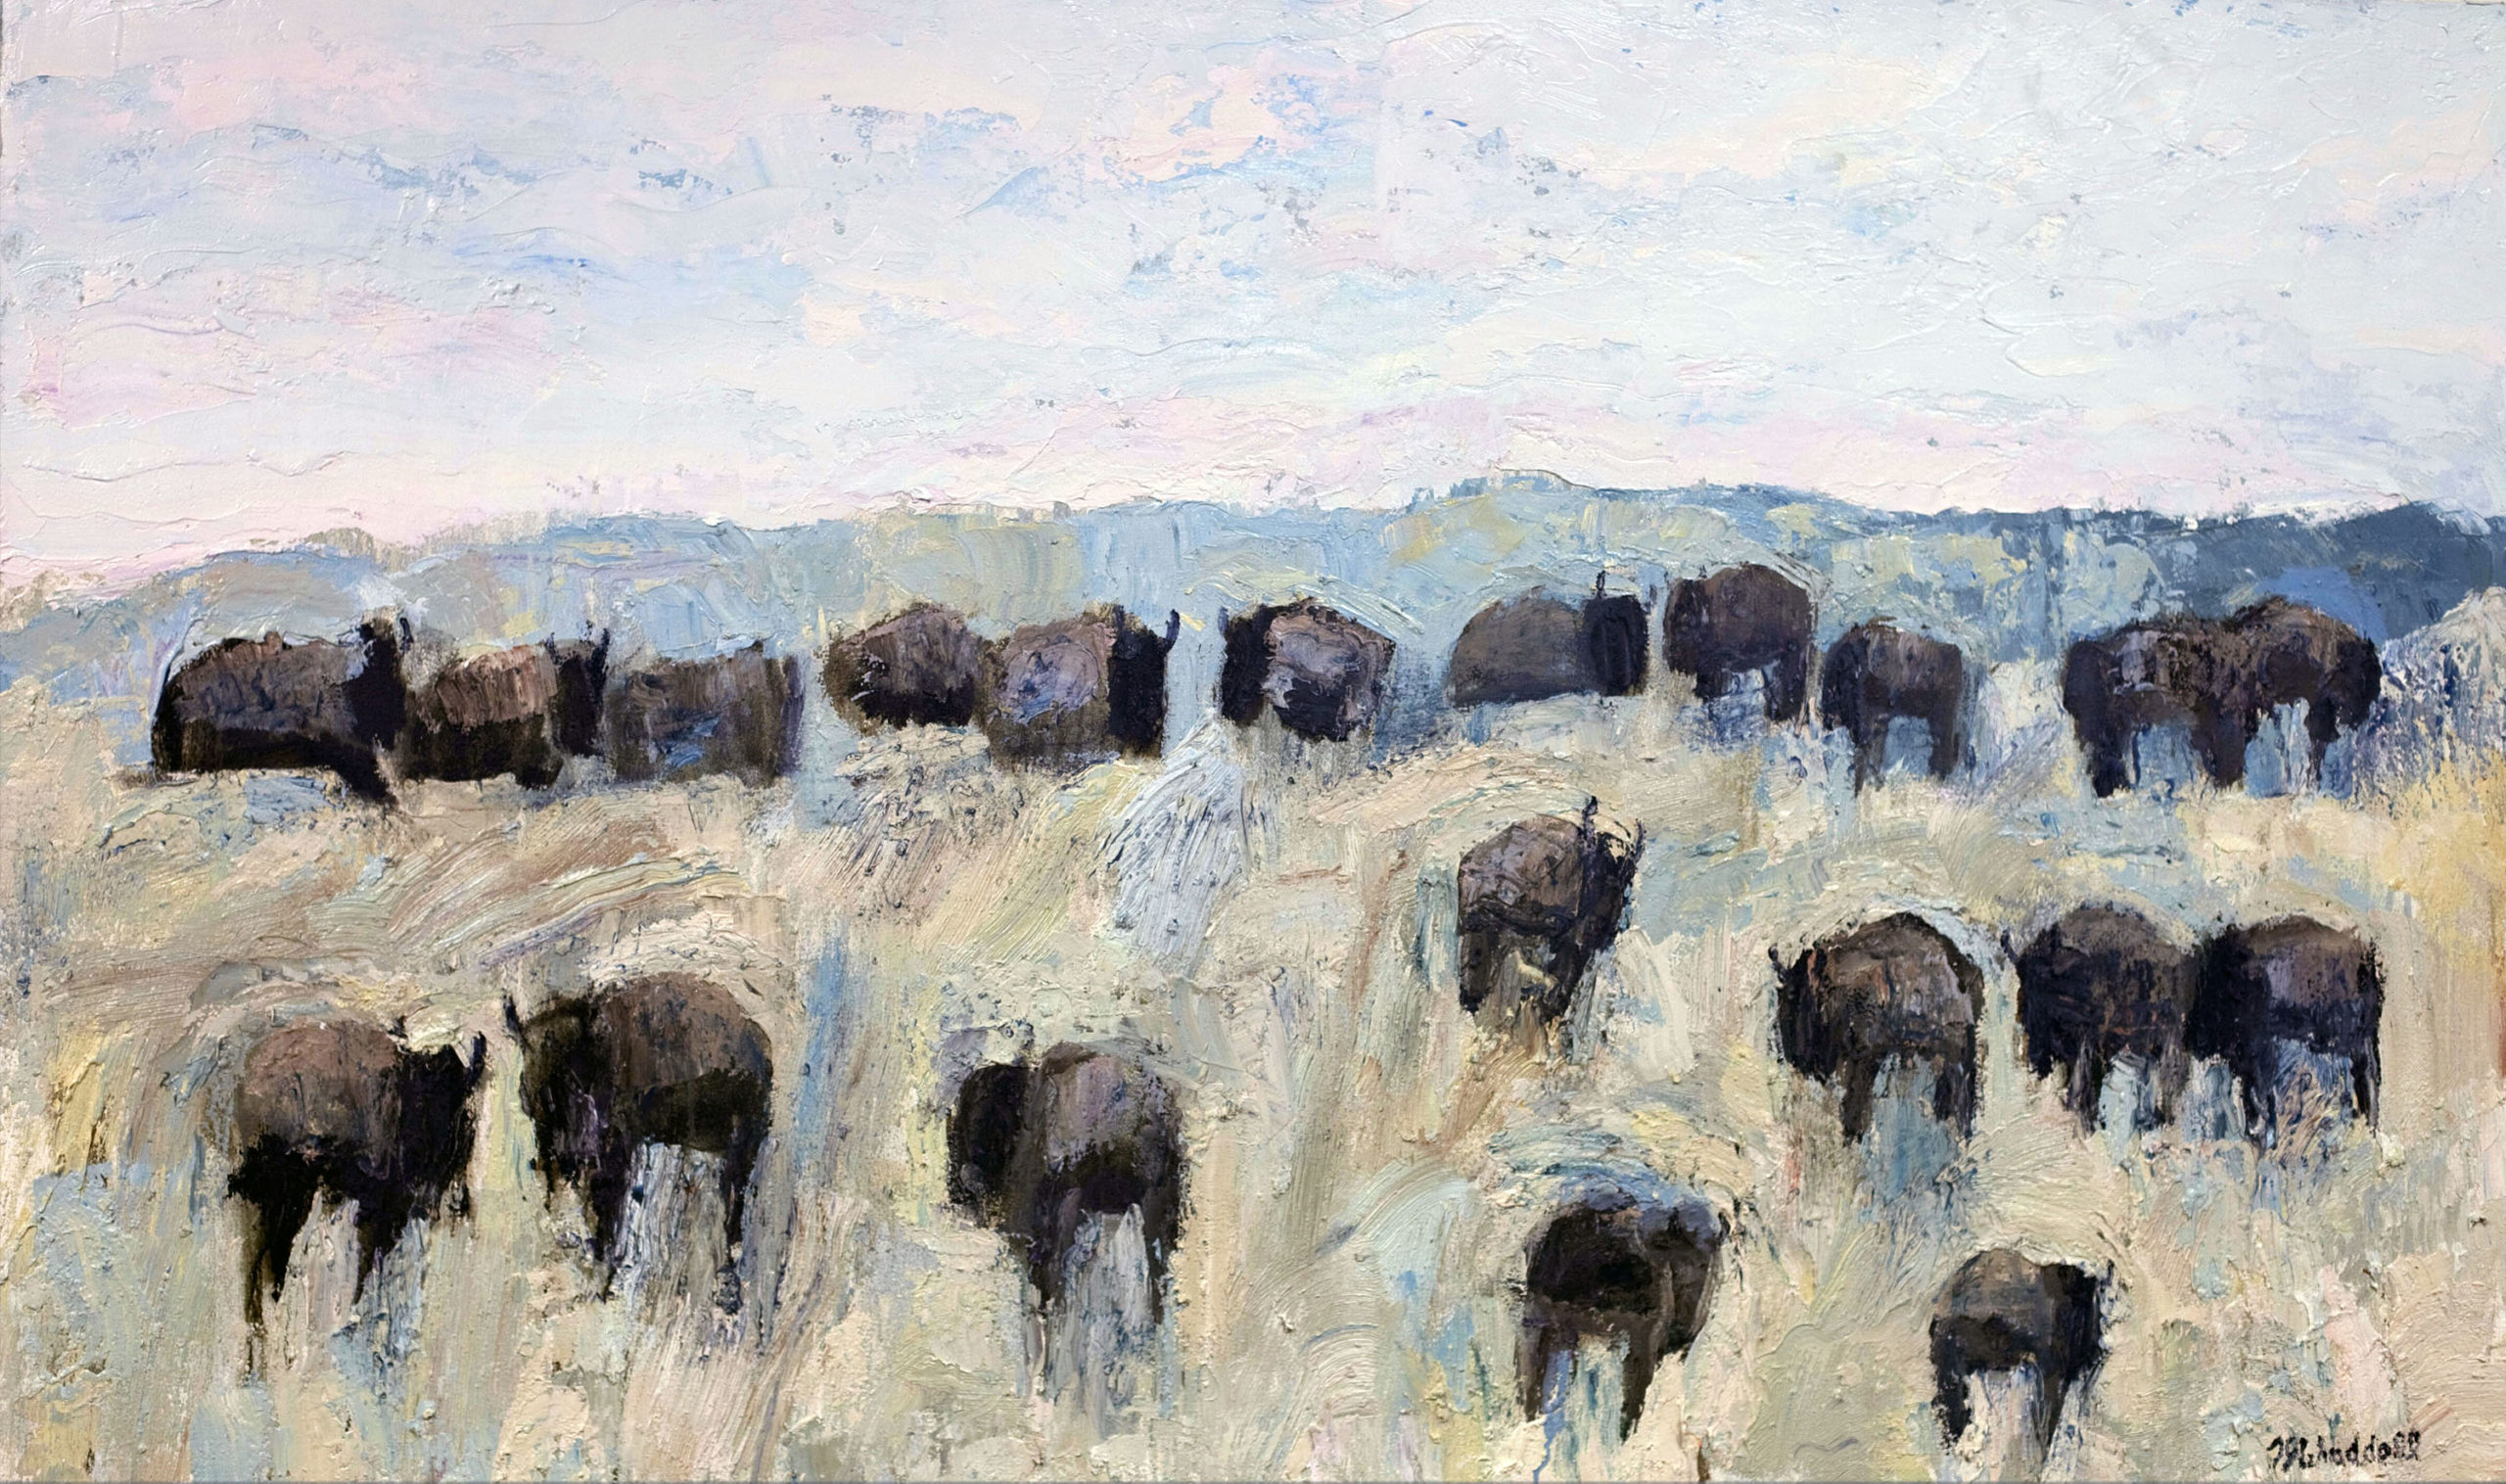 

											</b>

											<em>
												Lure of the West: Celebrating 50 Years of Gerald Peters Gallery  </em> 

											<h4>
												New York: April 29 - May 27, 2022      Santa Fe: June 24 - July 23, 2022											</h4>

		                																																													<i>Theodore Waddell, Red Rock Buffalo #12,</i>  
																																								2022, 
																																								oil, encaustic on canvas, 
																																								36 x 60 inches 
																								
		                				